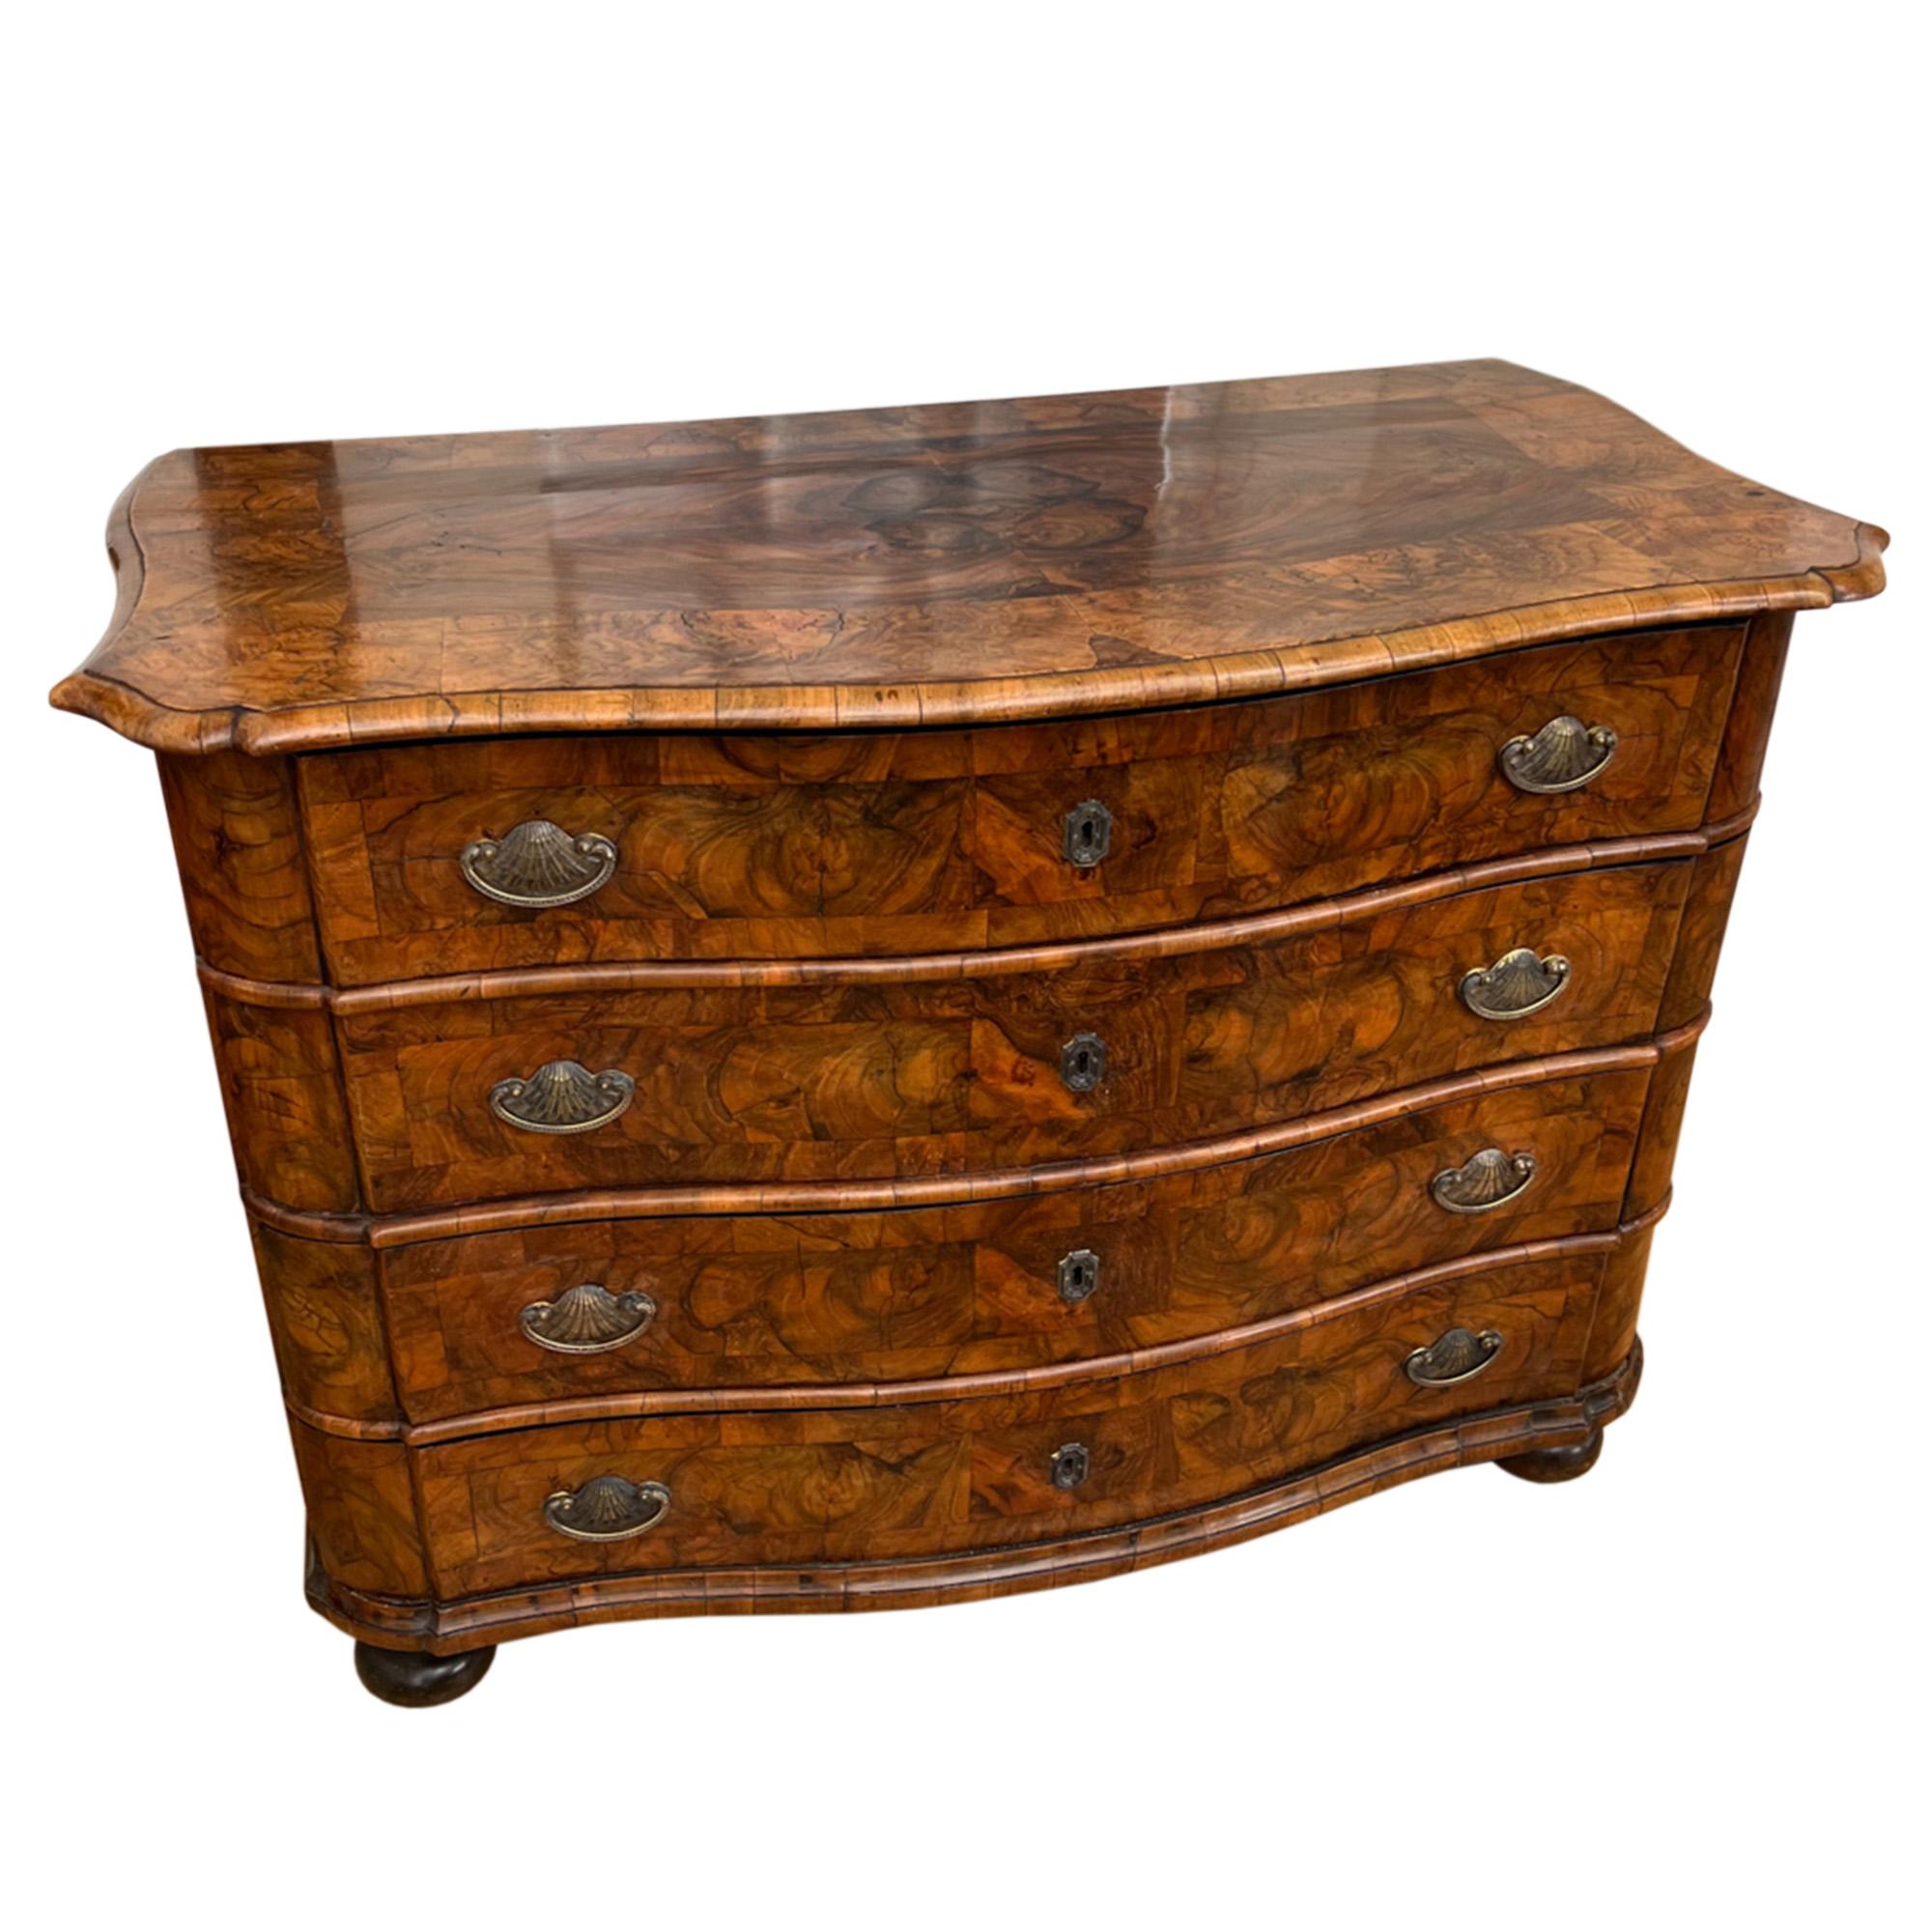 This is a lovely French 18th century serpentine chest of drawers veneered in beautifully figured walnut. Sitting on bun feet, it has an elegant shape and is finished with lovely shell handles. It has for large, deep draws providing ample storage